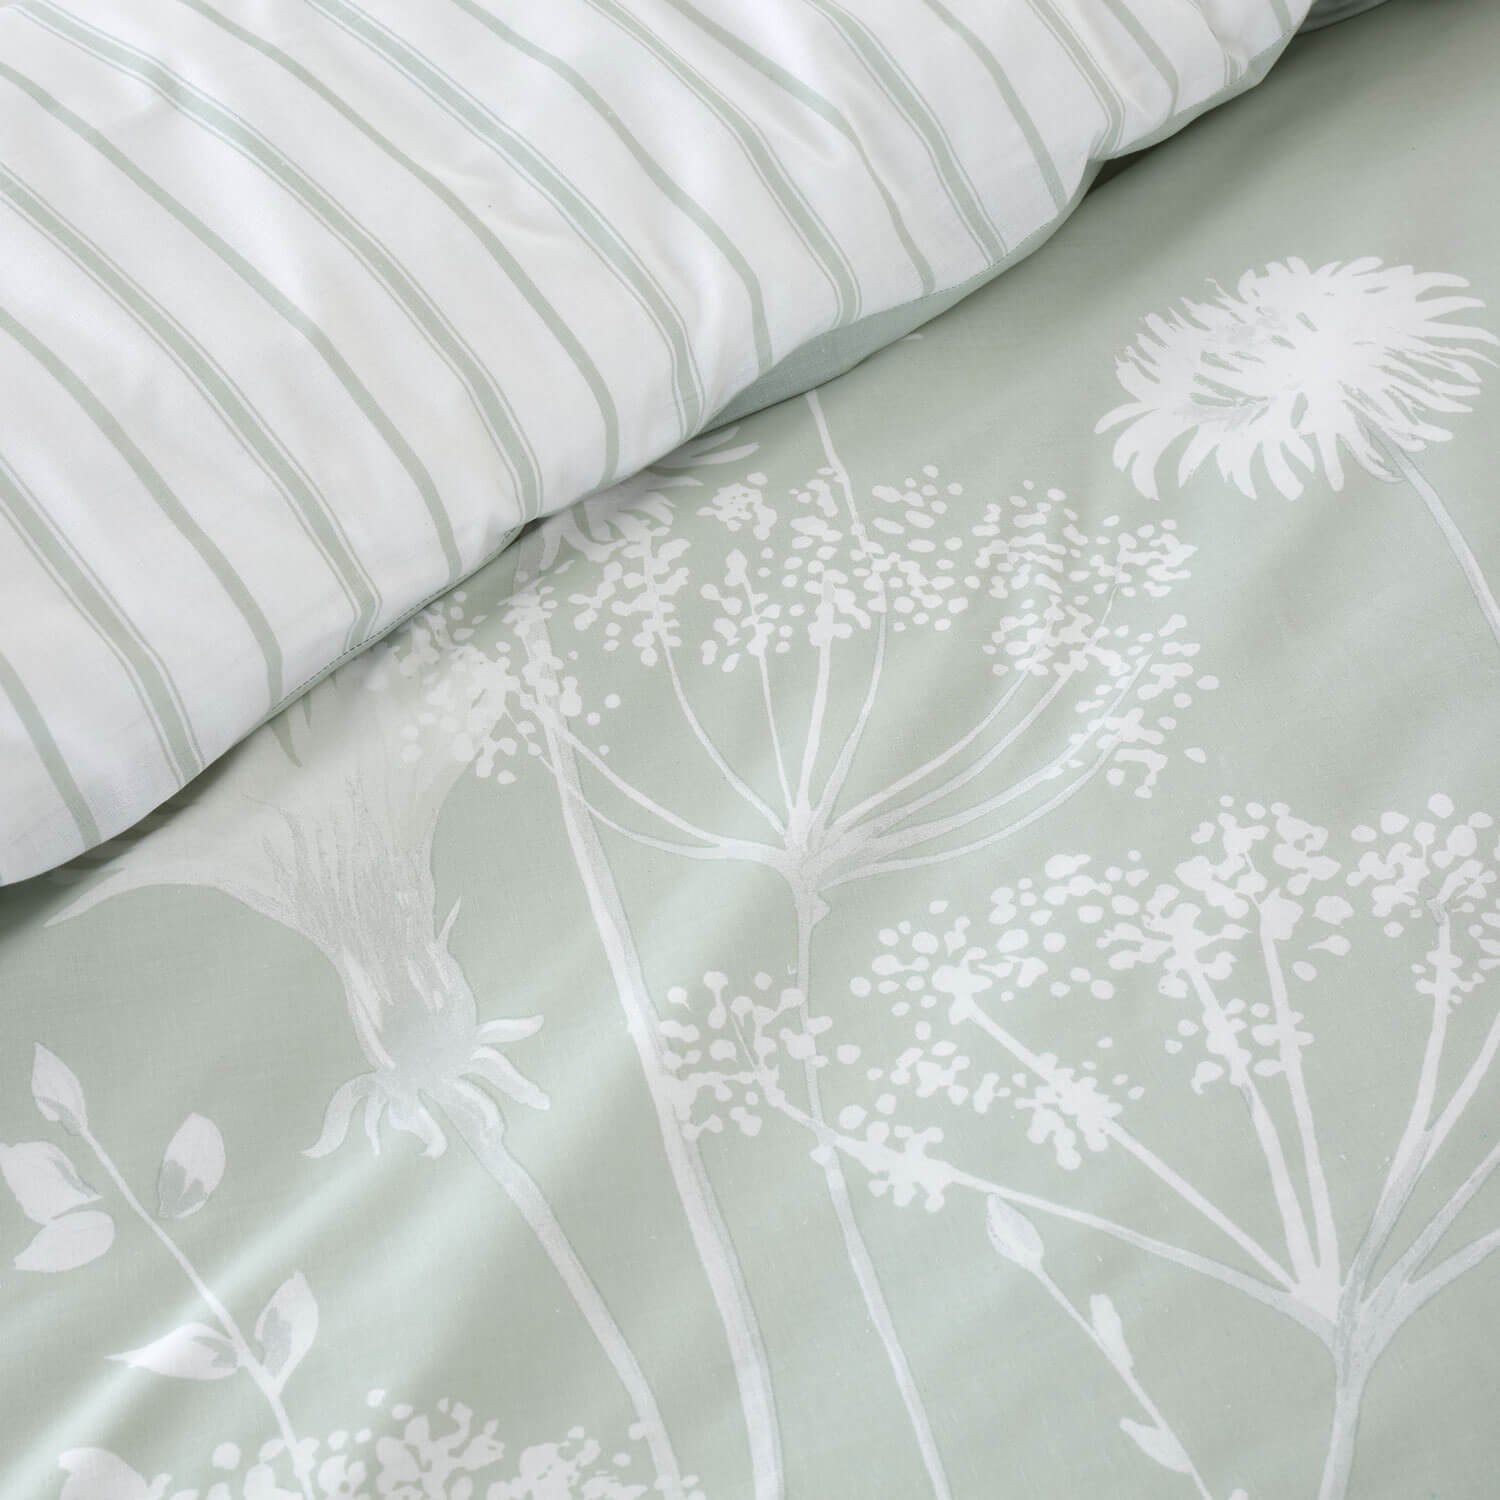  The Home Collection Meadowsweet Floral Duvet Cover Set - White/Green 2 Shaws Department Stores